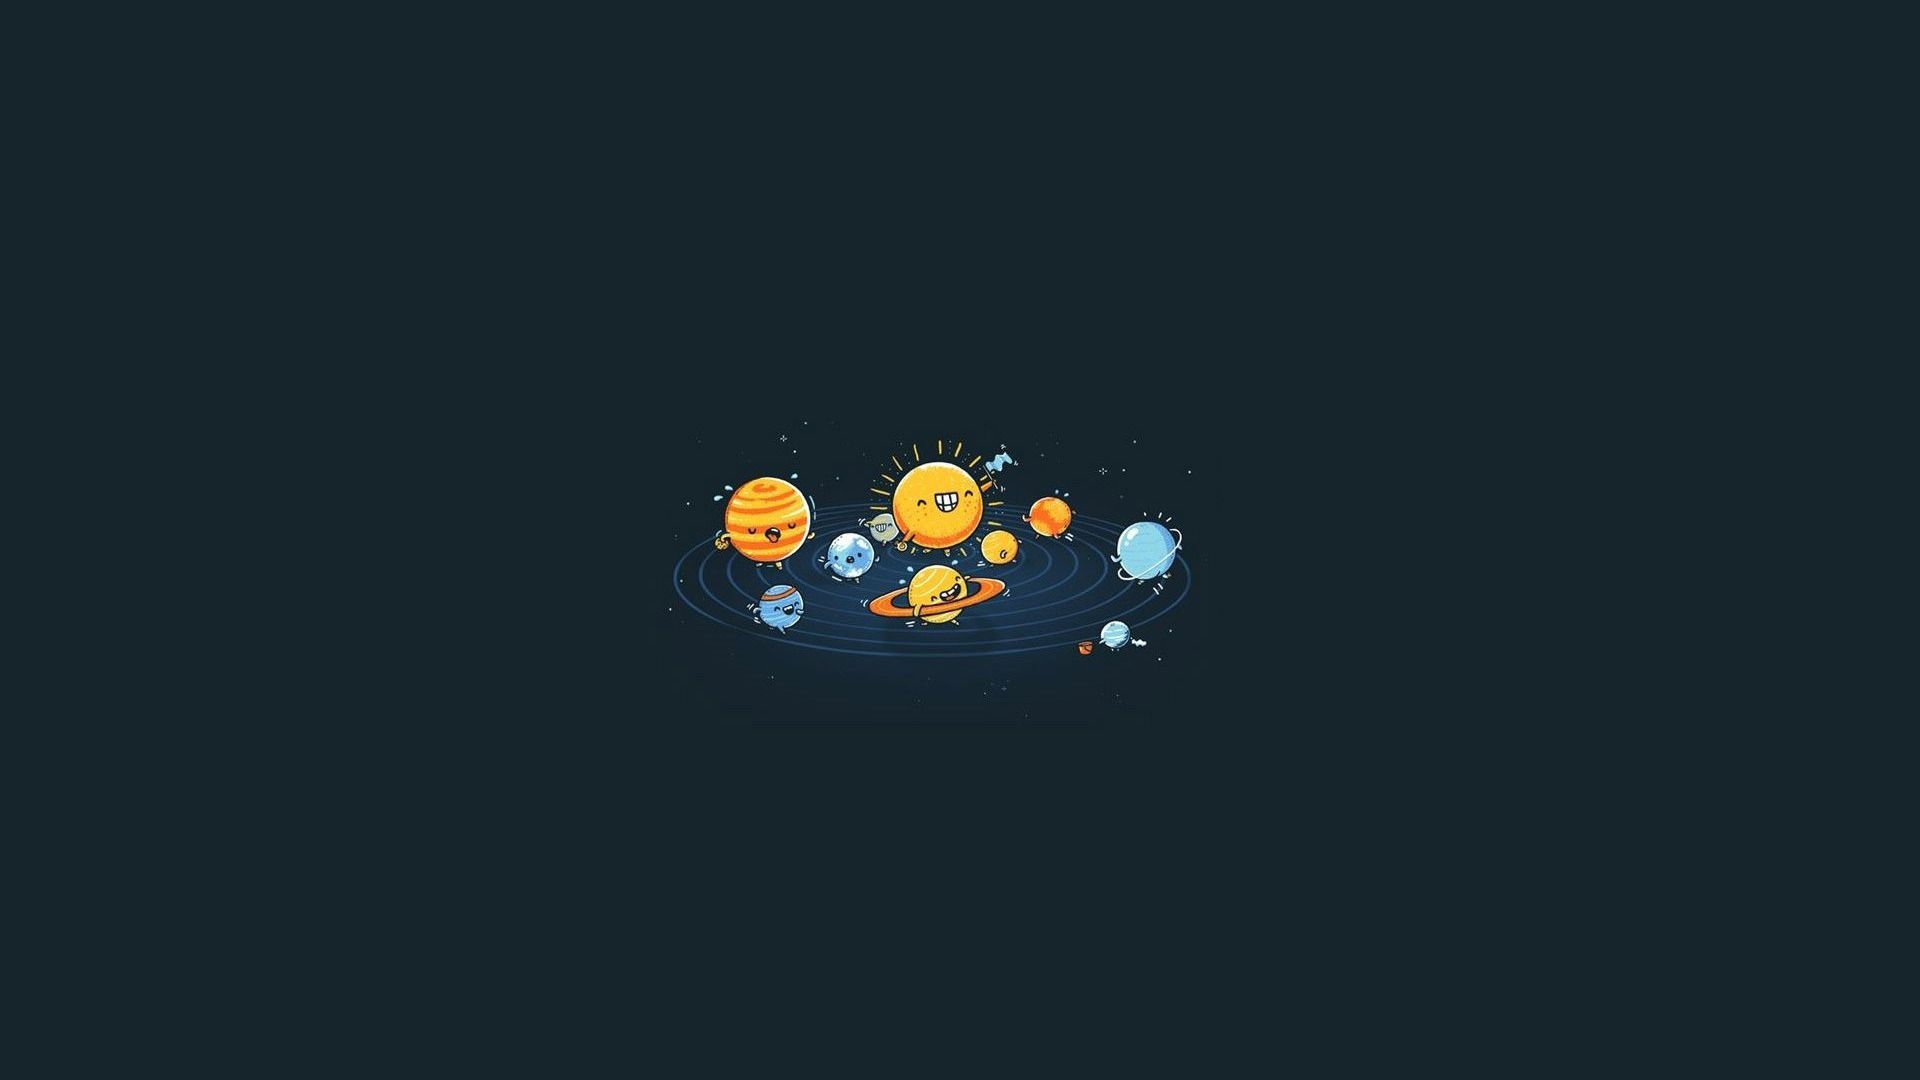 Solar System Wallpaper HD - Pics about space